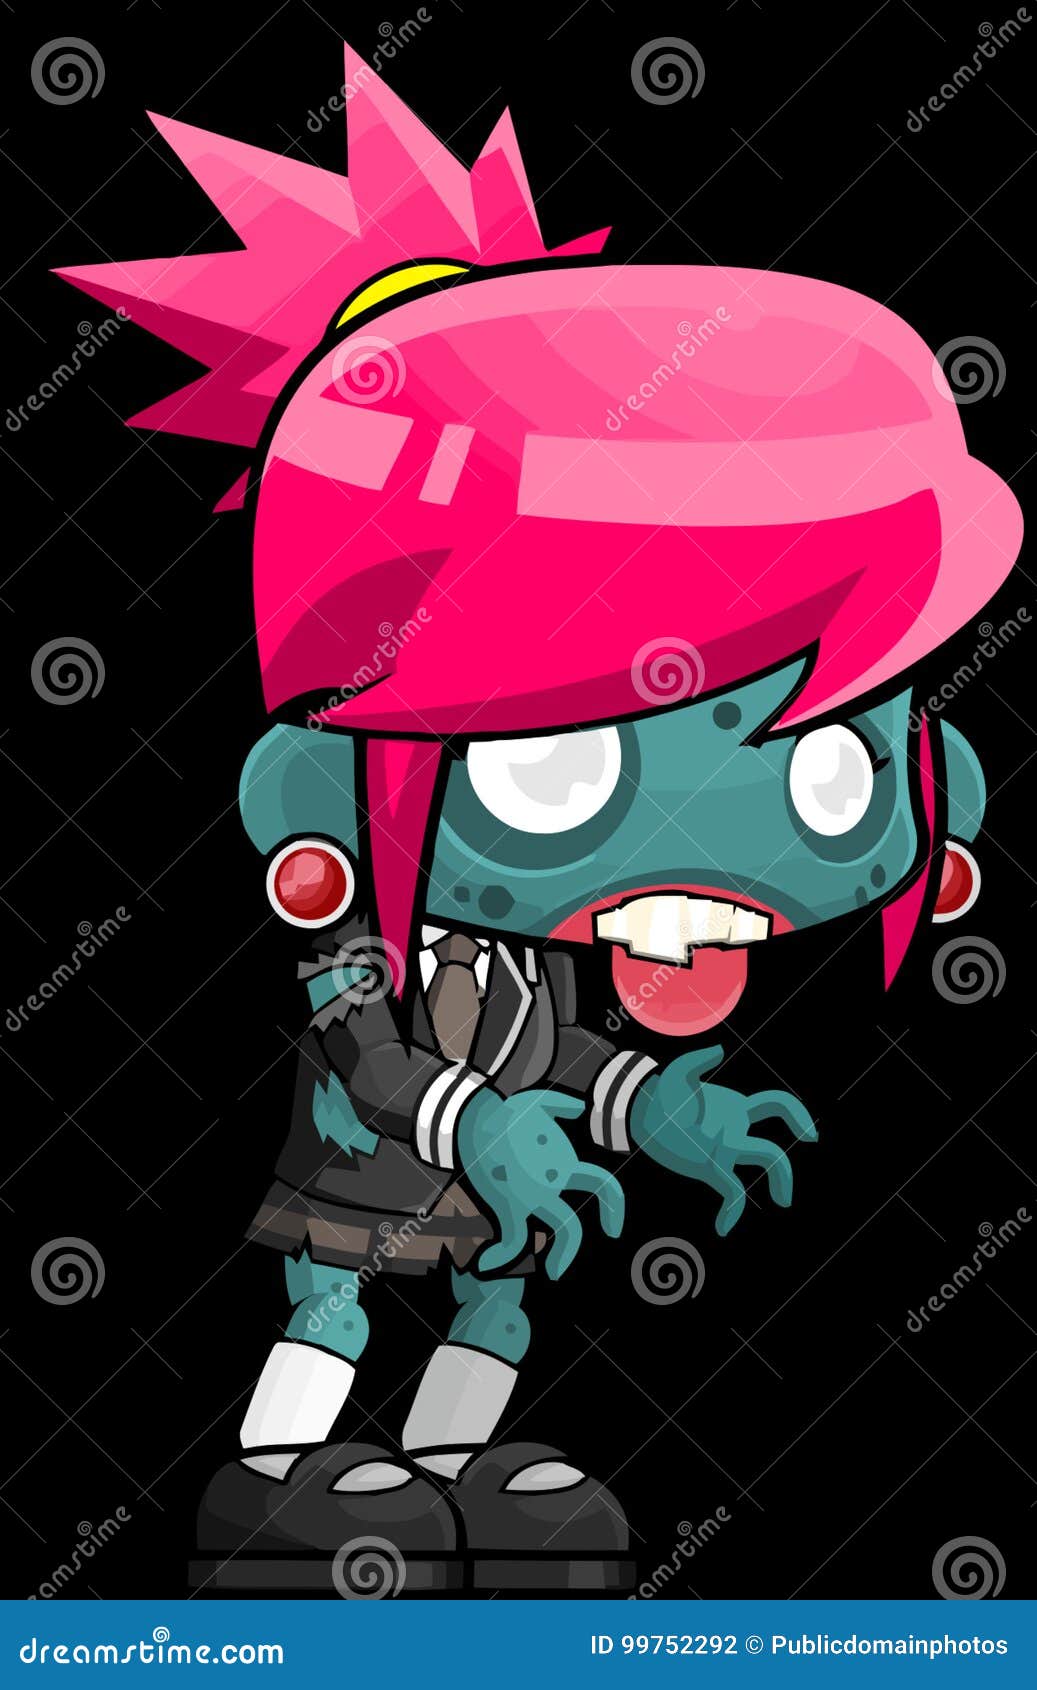 Pink, Cartoon, Fictional Character, Art Picture. Image: 99752292